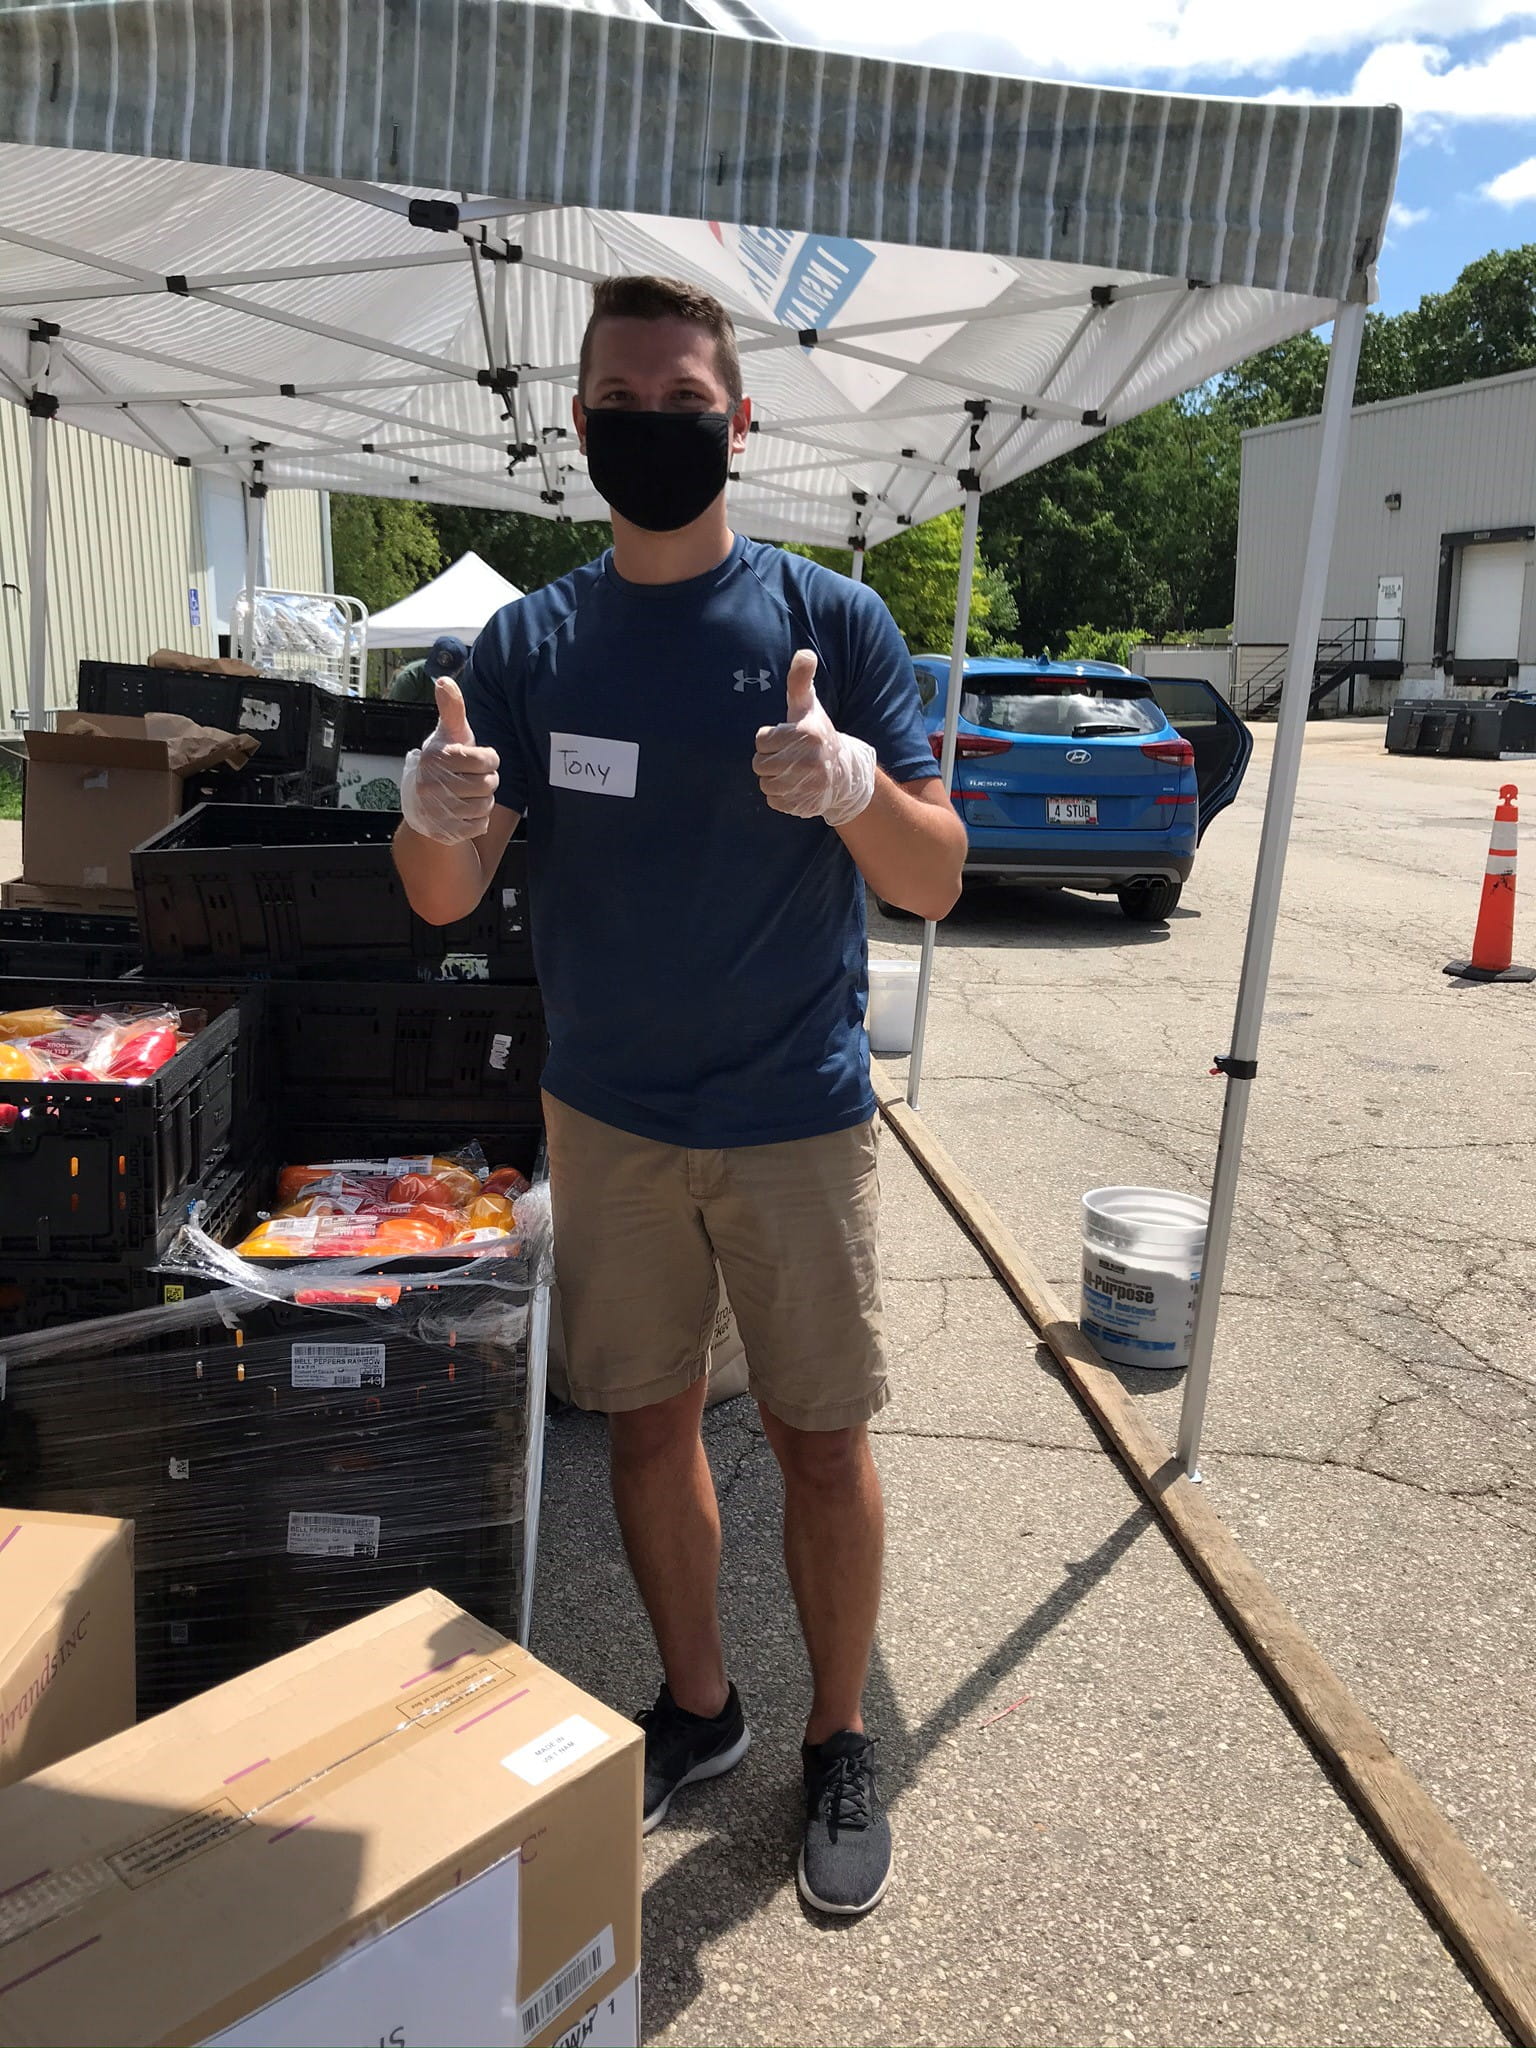 Tony Hildebrandt, Quality Assurance Intern, volunteered at The River Food Pantry in Madison and helped load cars with groceries for its curbside delivery program.